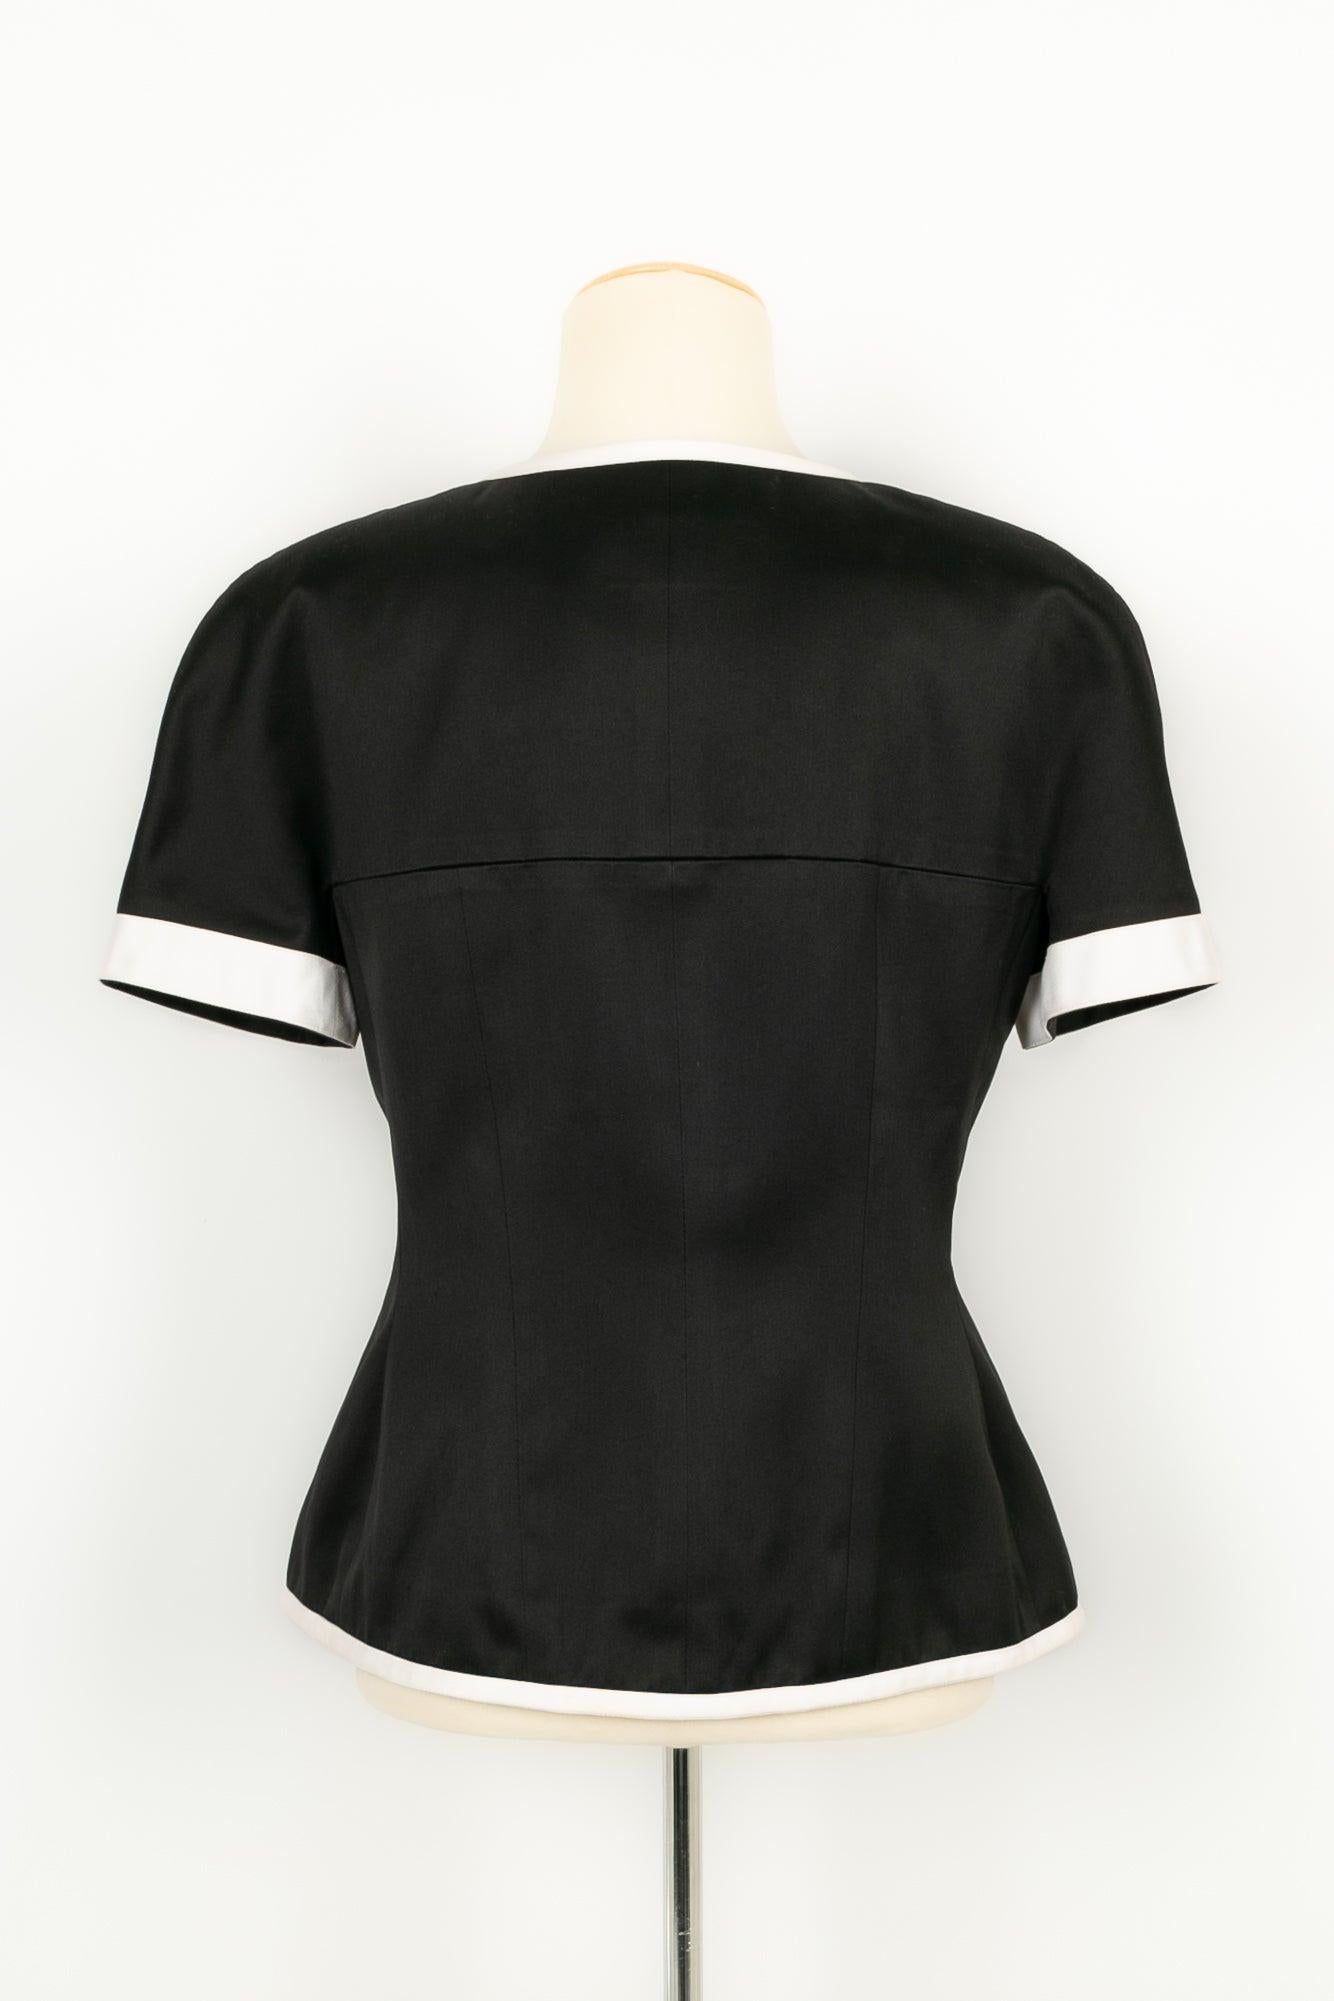 Chanel Short-Sleeved Jacket in Black Satin Edged with White Satin, 1990s In Excellent Condition For Sale In SAINT-OUEN-SUR-SEINE, FR